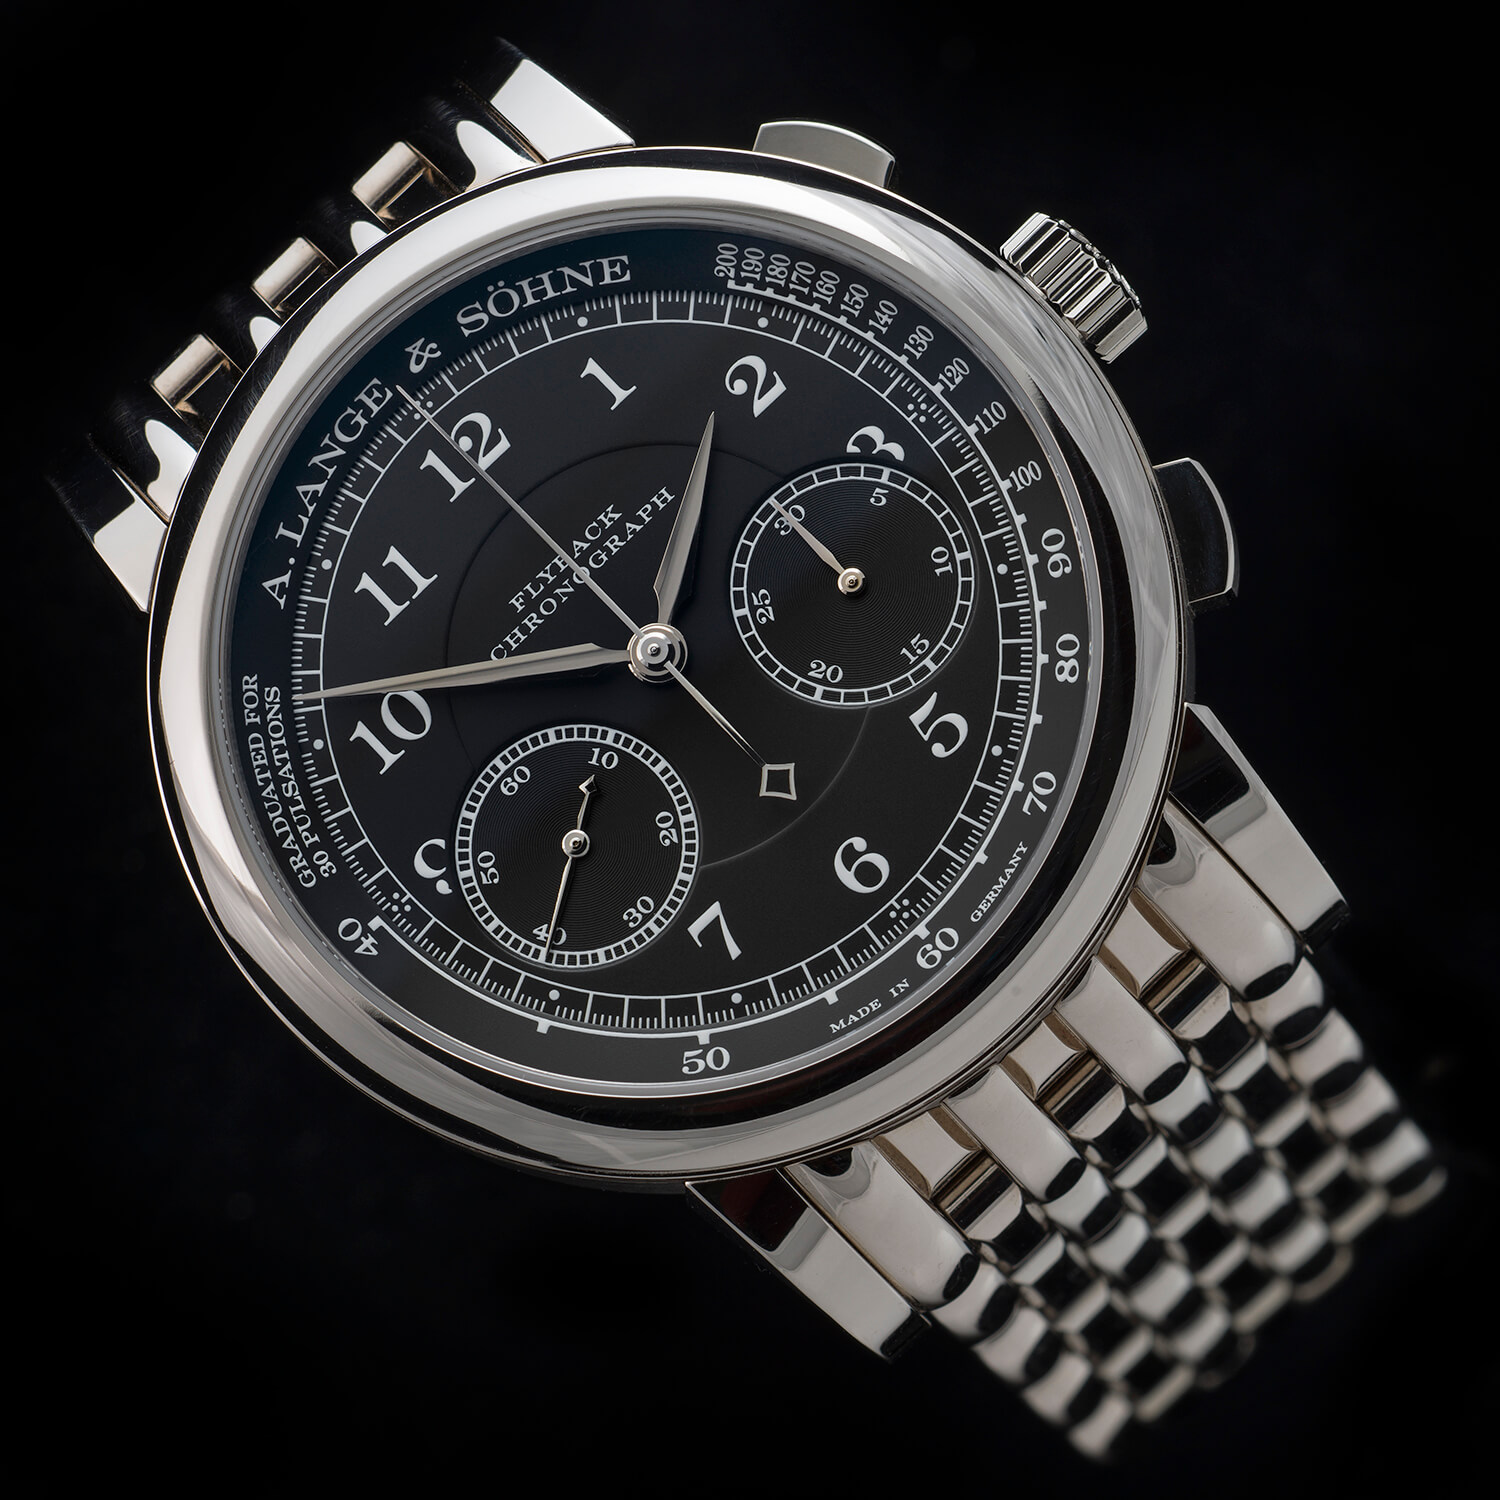 Easy as pie: shooting the black-dialed A. Lange & Söhne 1815 Chronograph